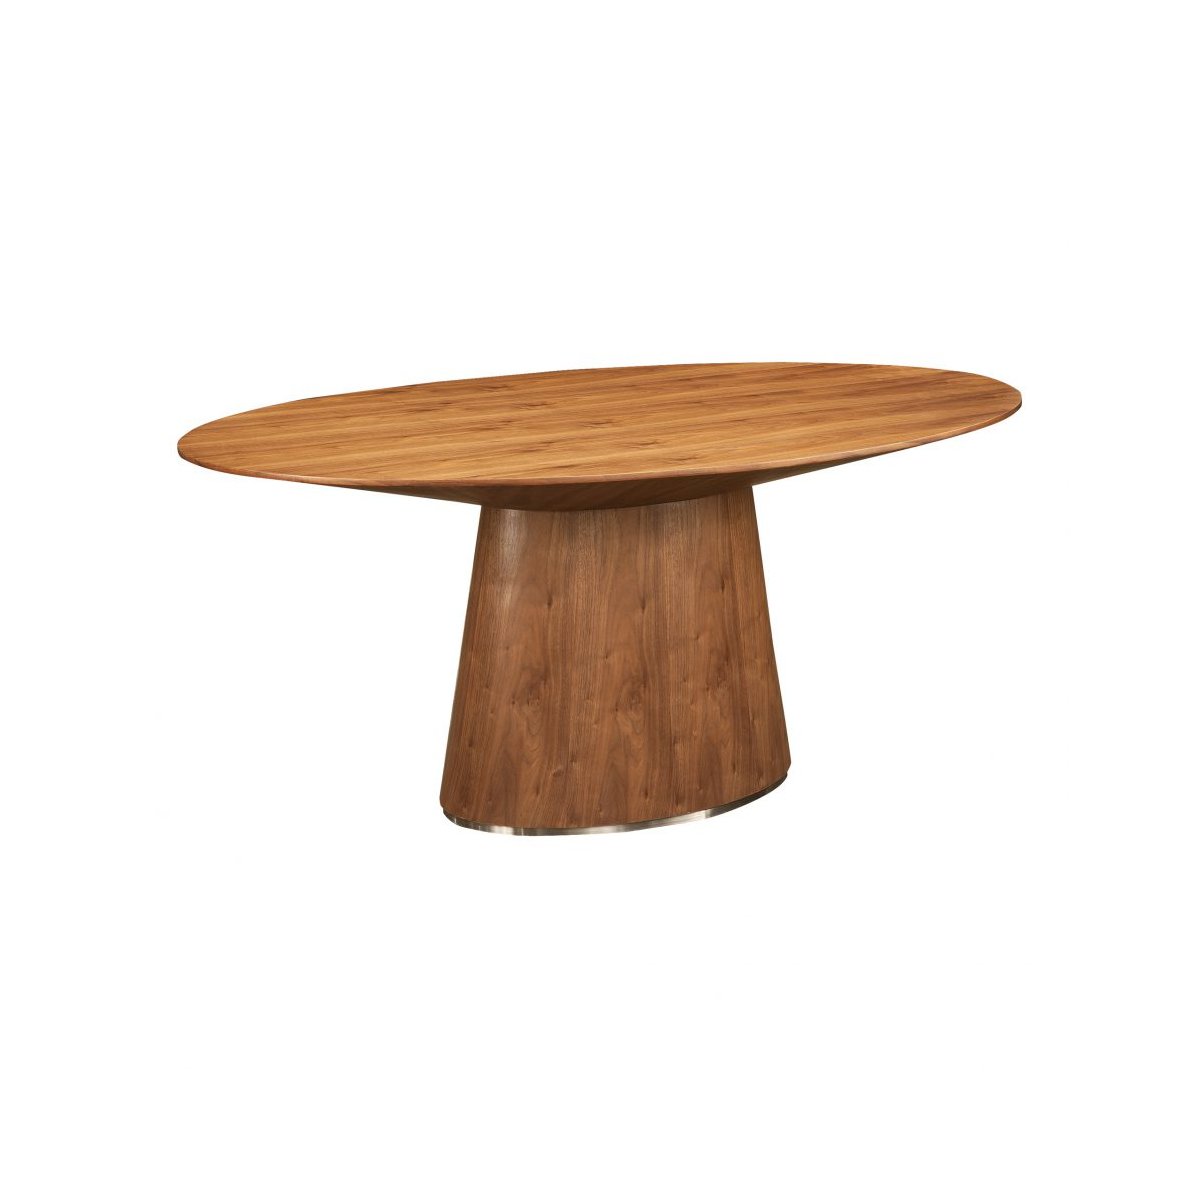 Load image into Gallery viewer, Otago Oval Dining Table BrownDining Tables Moe&amp;#39;s  Brown   Four Hands, Burke Decor, Mid Century Modern Furniture, Old Bones Furniture Company, Old Bones Co, Modern Mid Century, Designer Furniture, https://www.oldbonesco.com/
